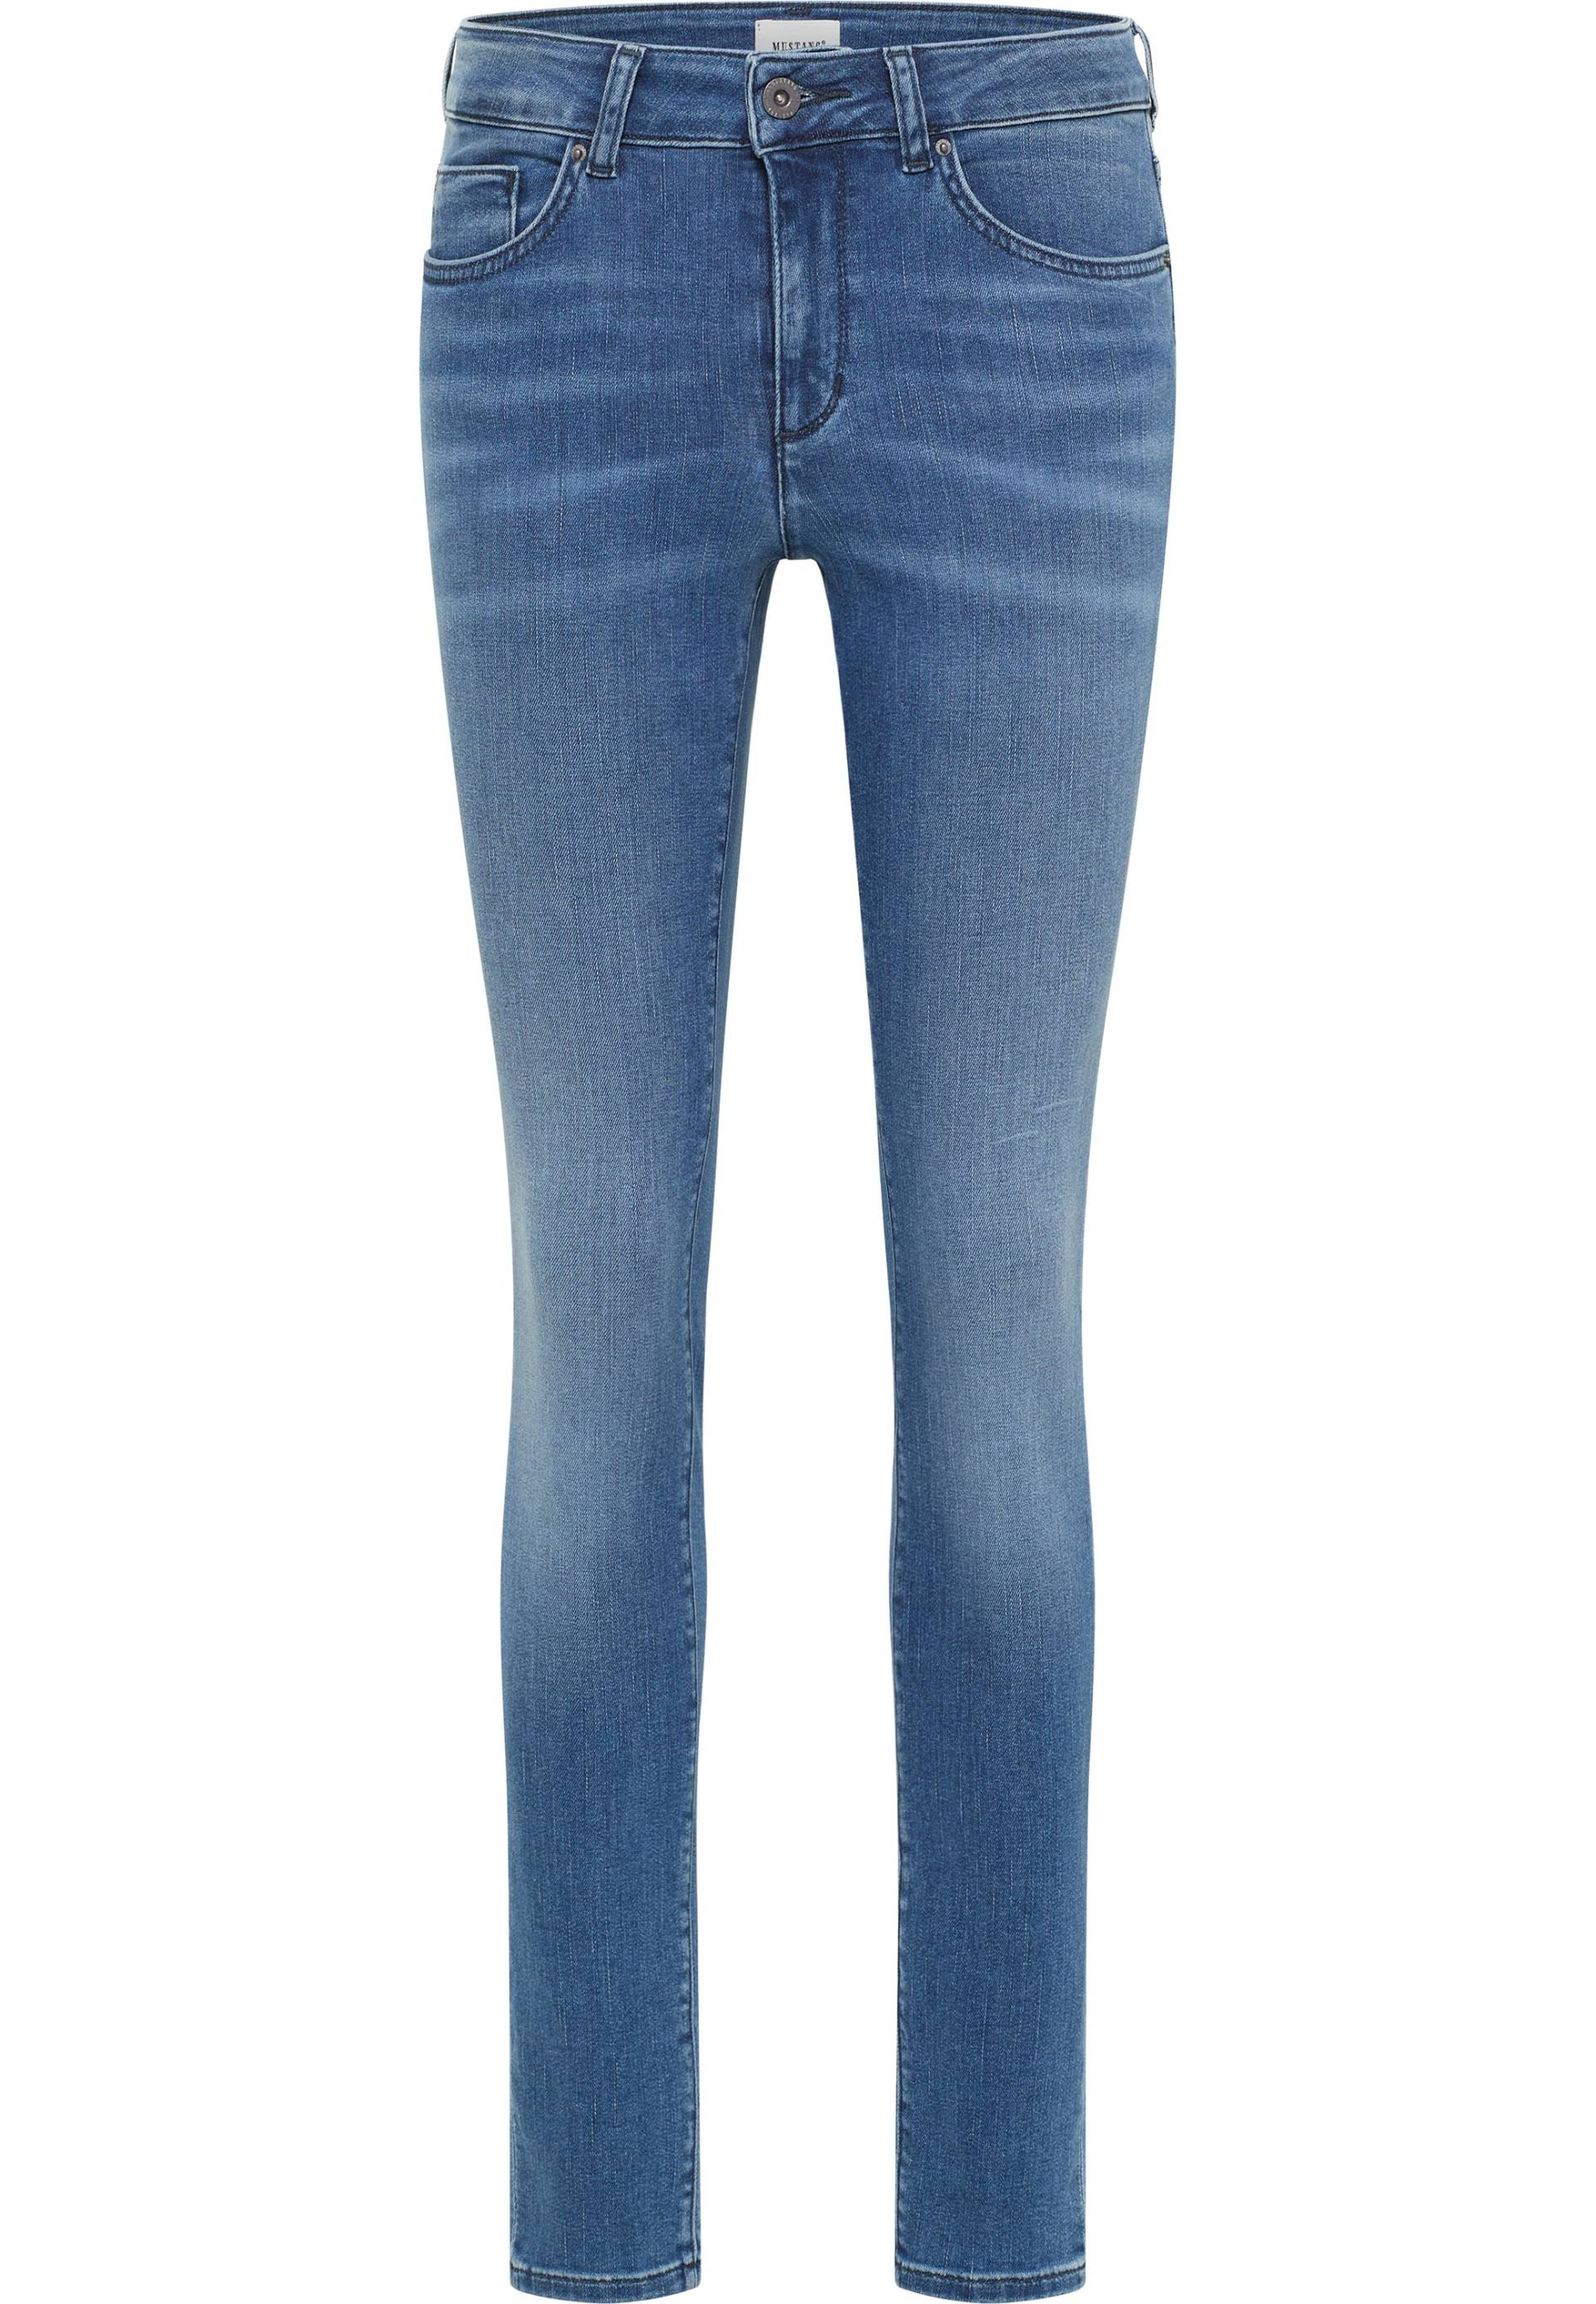 MUSTANG Skinny-fit-Jeans »Shelby Skinny« von Mustang